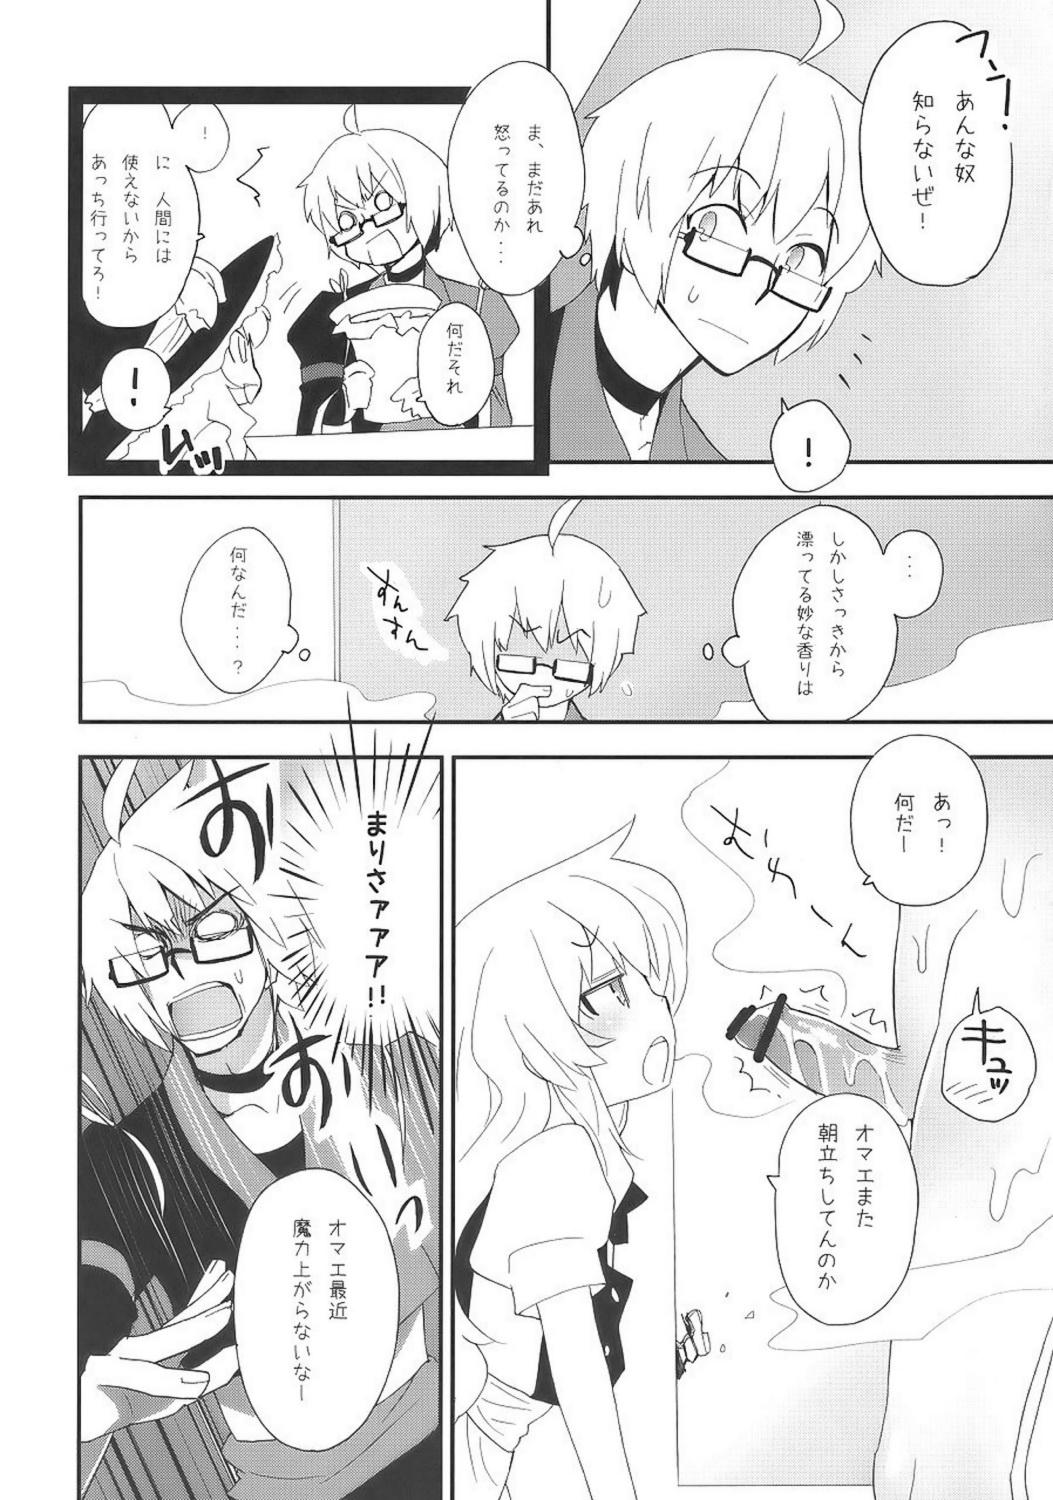 Sloppy Blow Job Marisa to Kinoko to FLY HIGH - Touhou project Gaygroup - Page 7